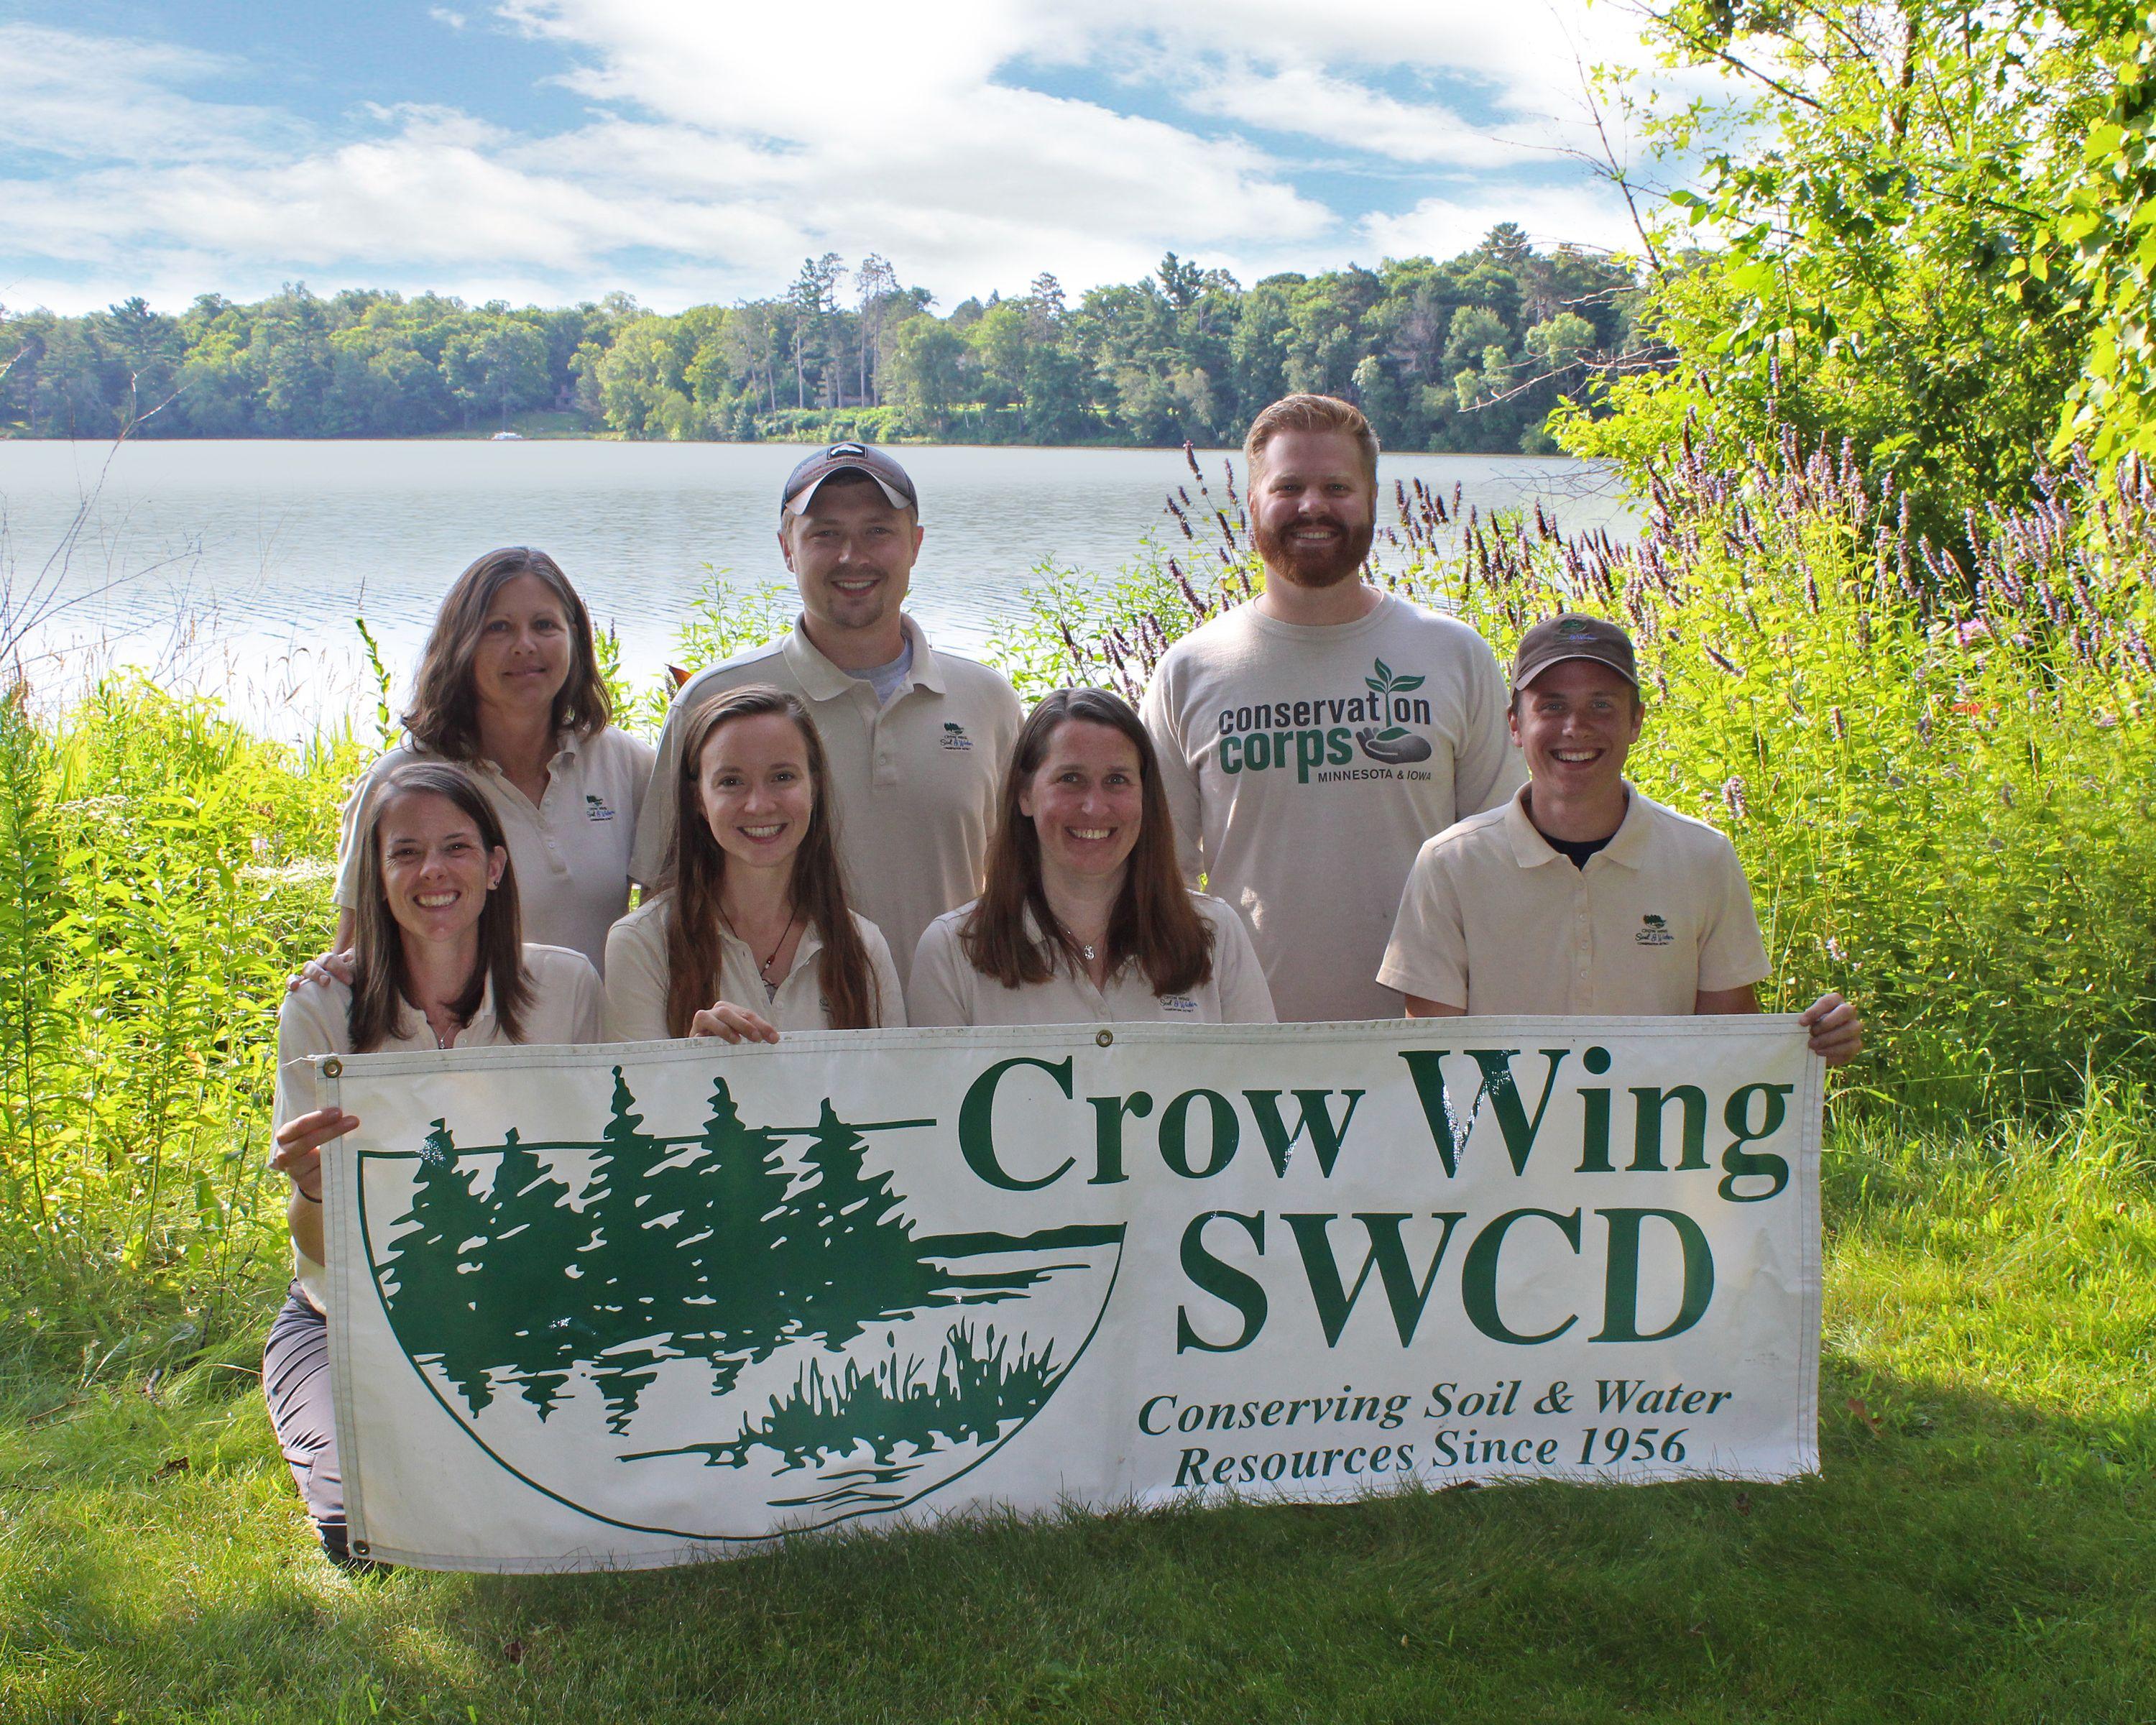 SWCD Logo - About Us - Crow Wing Soil & Water Conservation District - Crow Wing ...